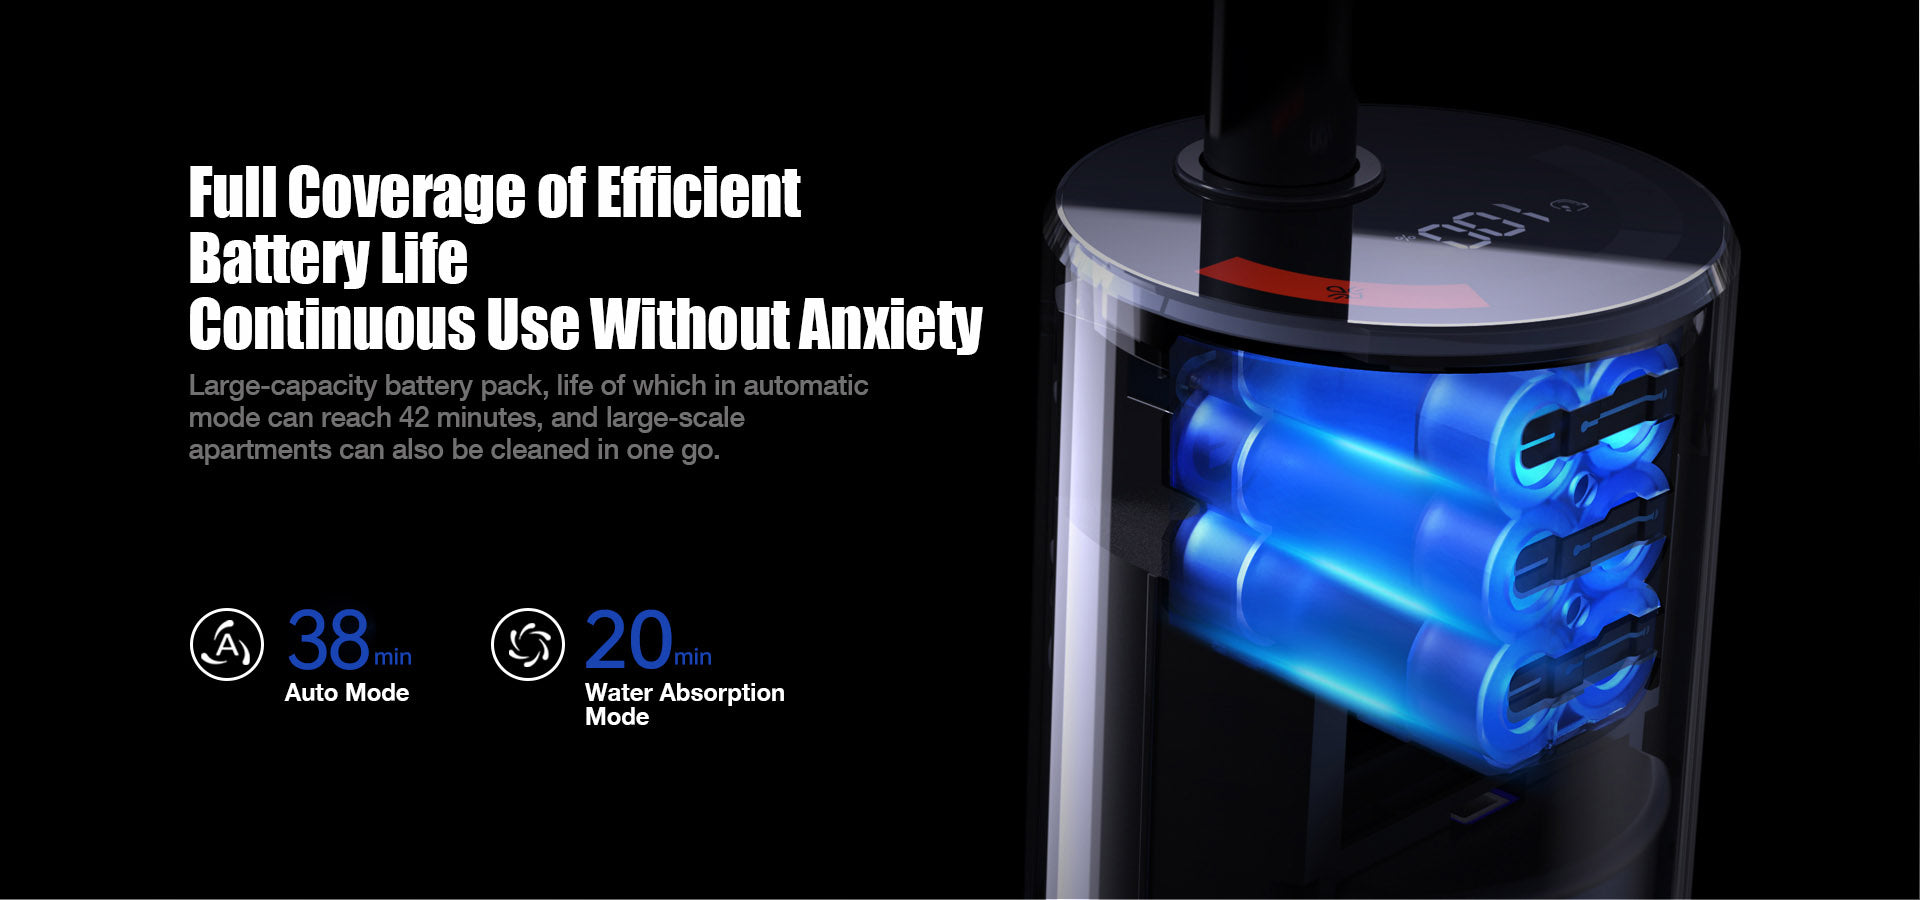 Full_Coverage_of_EfficientBattery_LifeContinuous_Use_Without_Anxiety